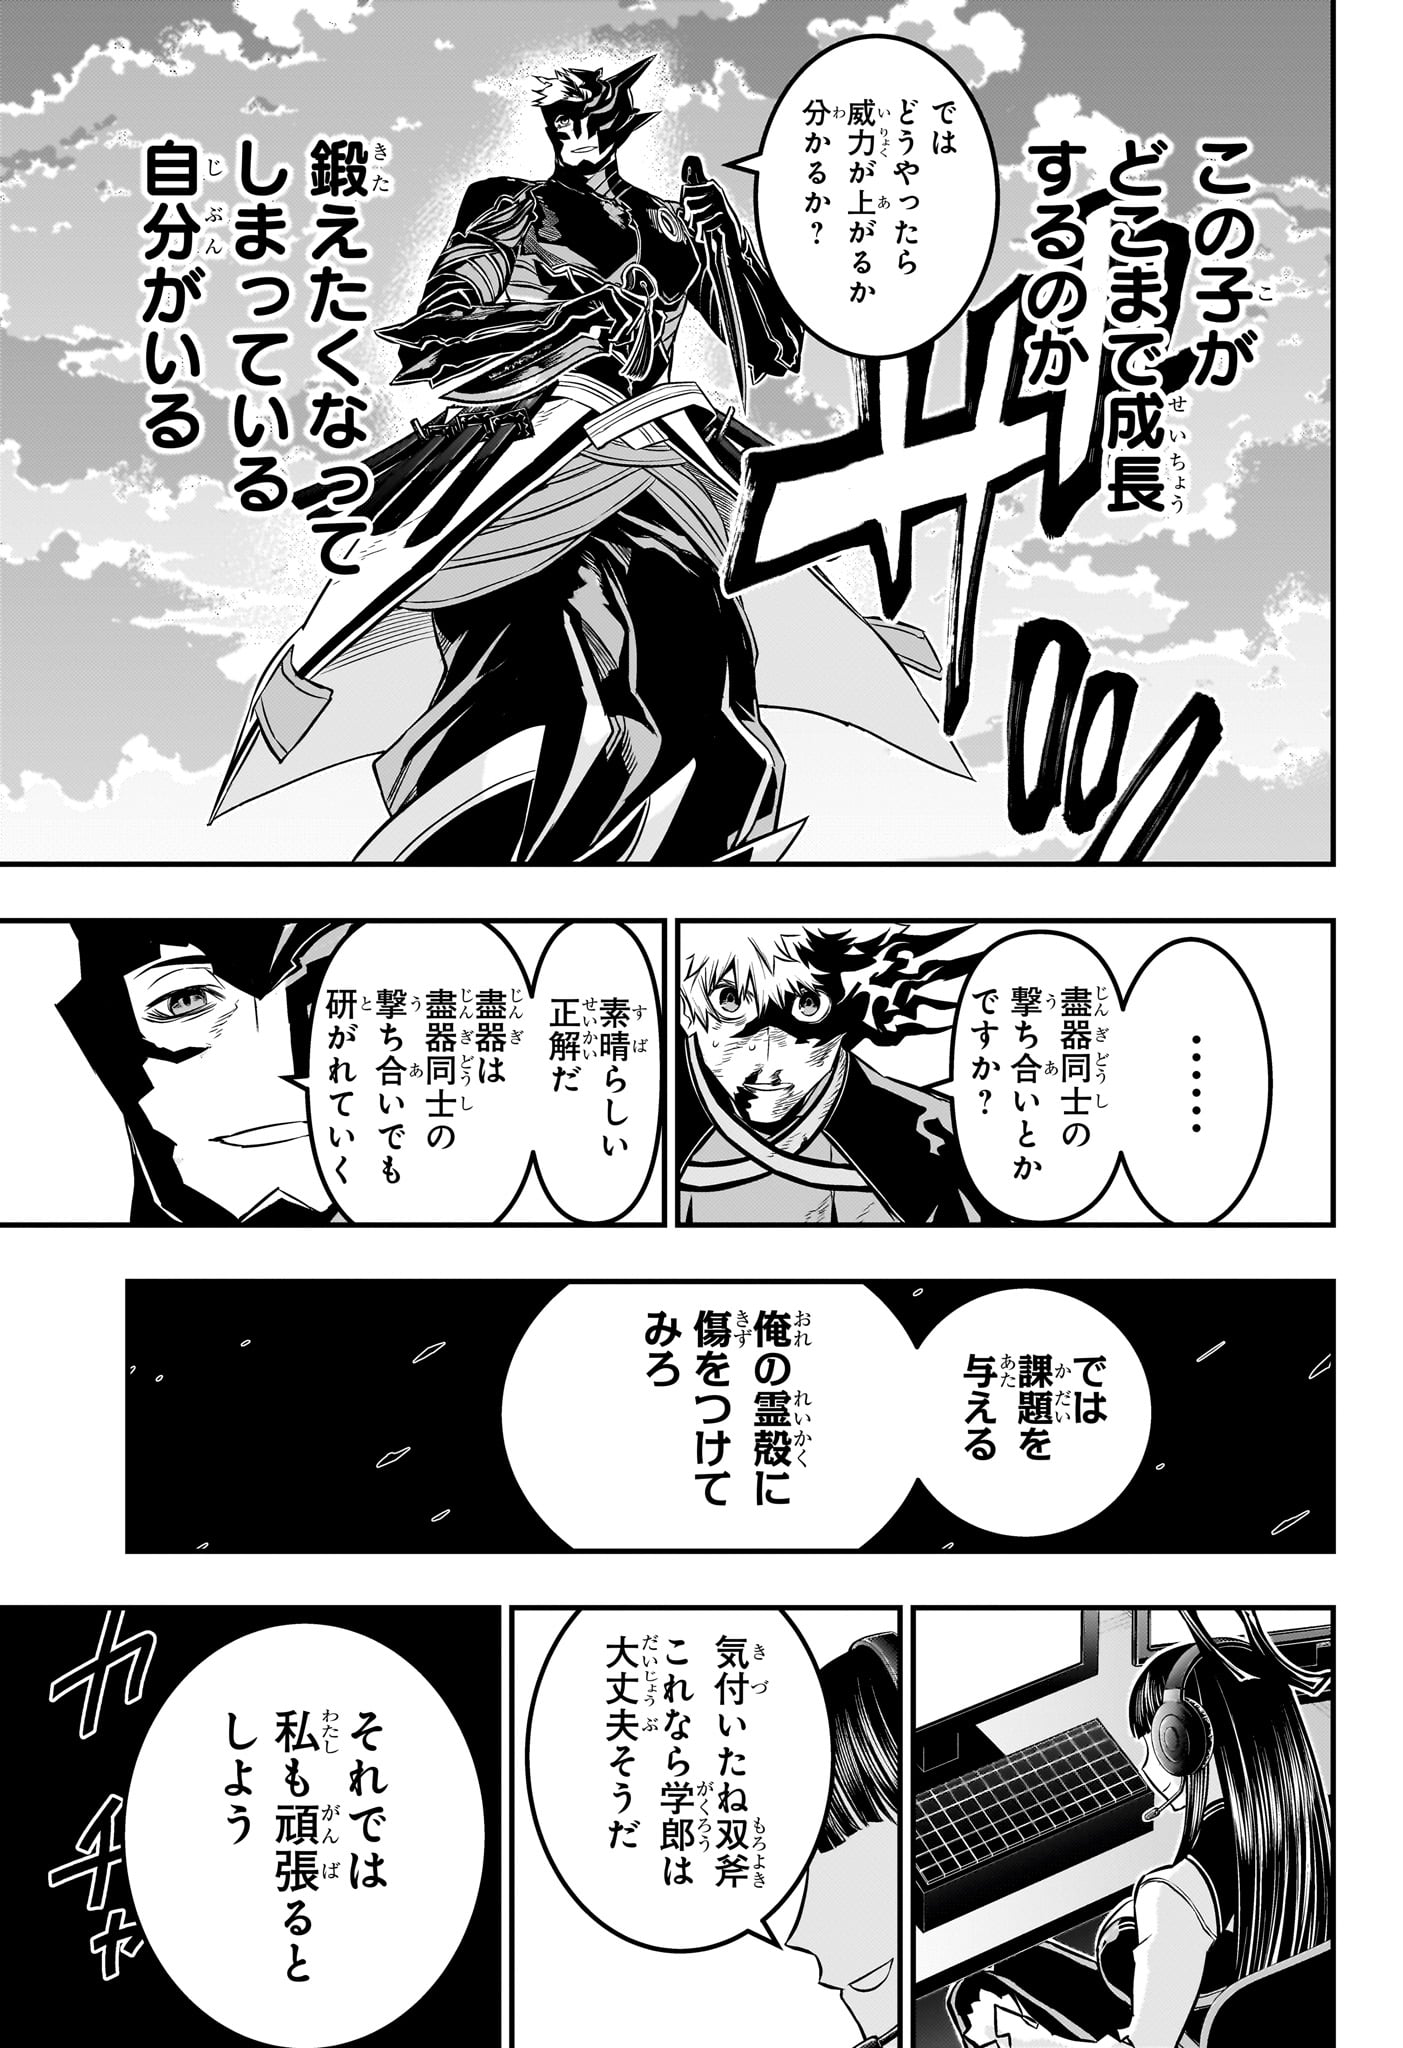 Nue no Onmyouji - Chapter 48 - Page 9